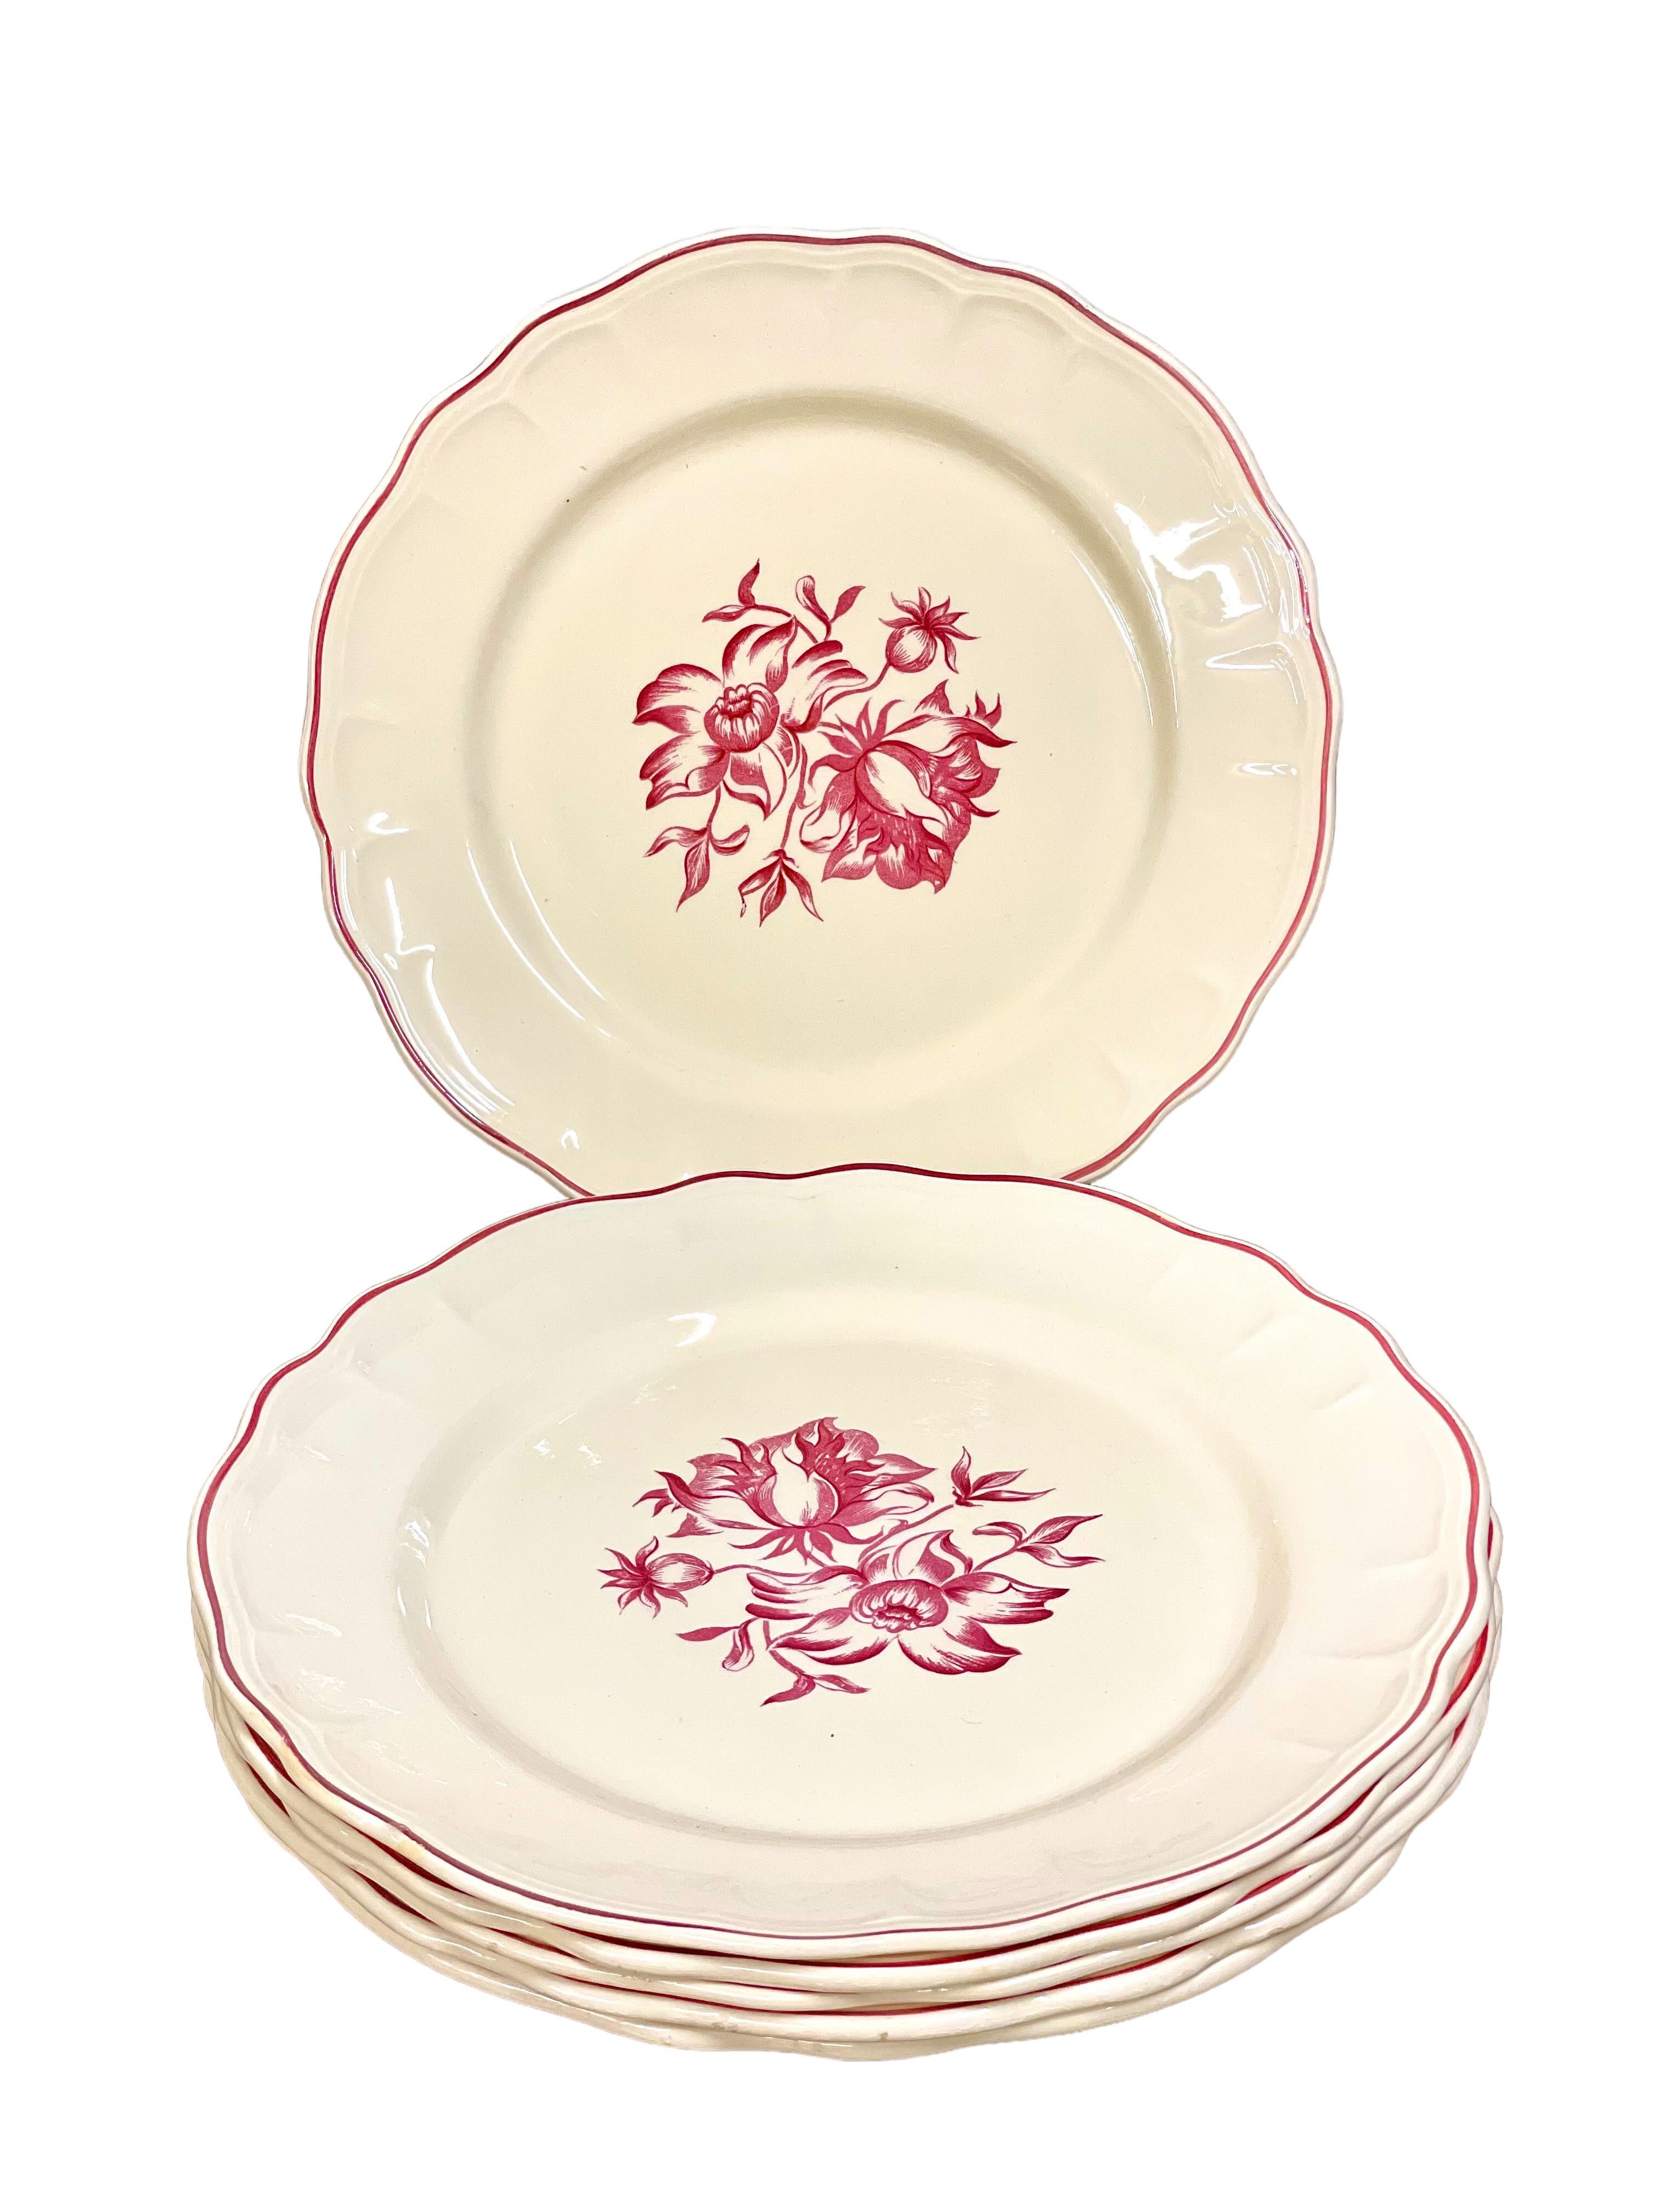 Set of six vintage creamware dinner plates, beautifully decorated with a red transferware print of delicate flowerbuds and foliage. The plates have a pretty scalloped rim, highlighted with a hand-painted red border and are in excellent vintage